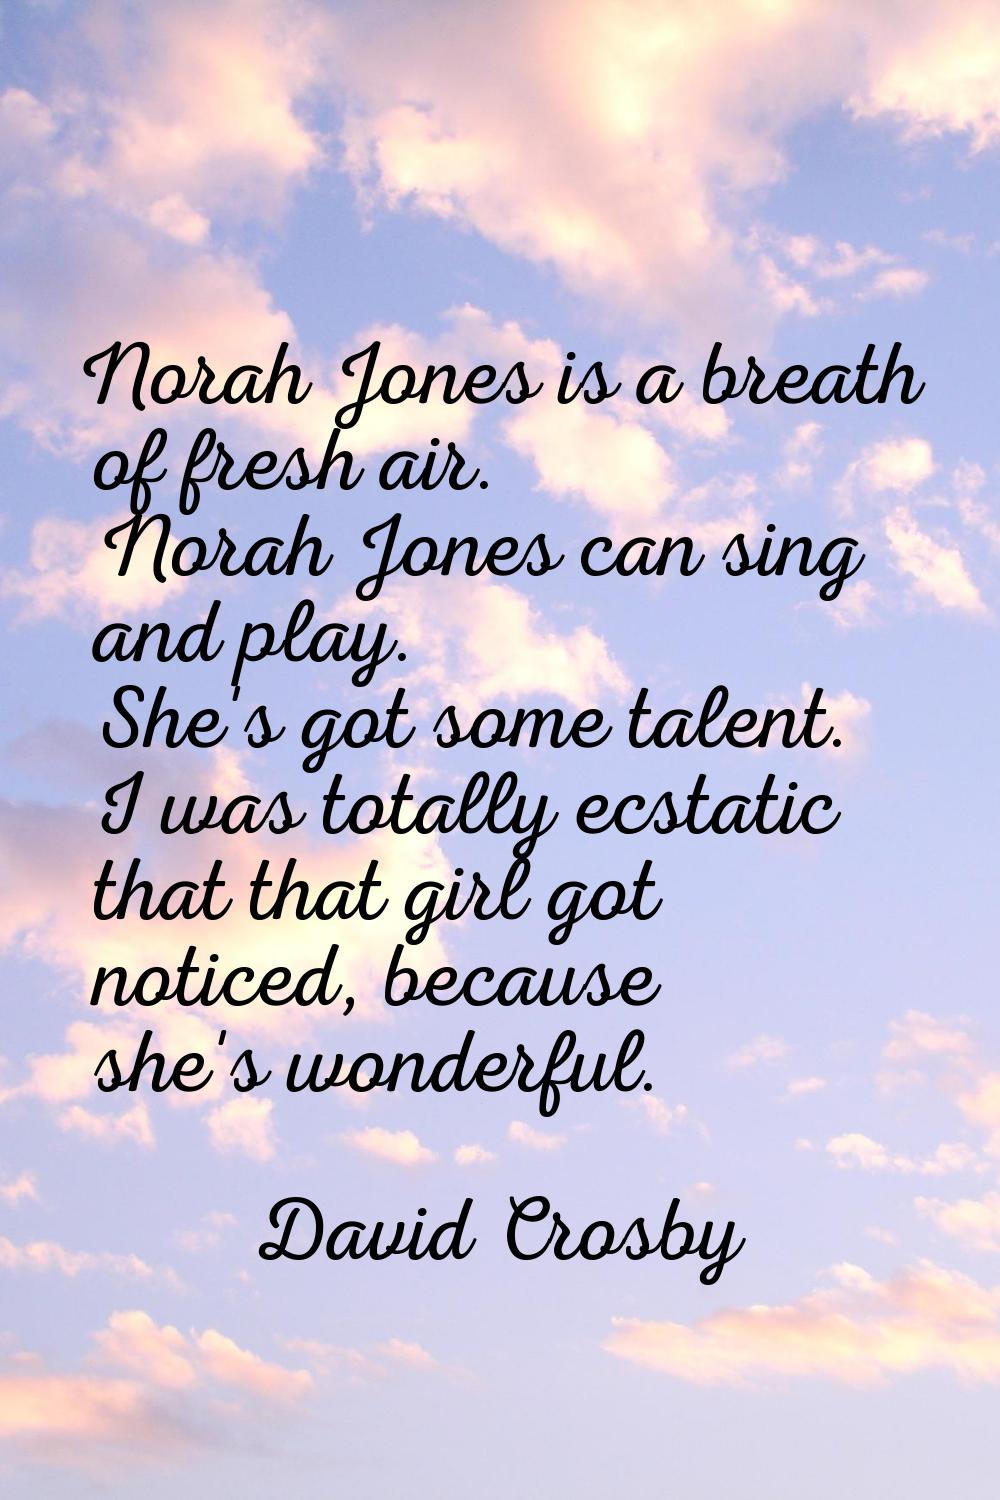 Norah Jones is a breath of fresh air. Norah Jones can sing and play. She's got some talent. I was t